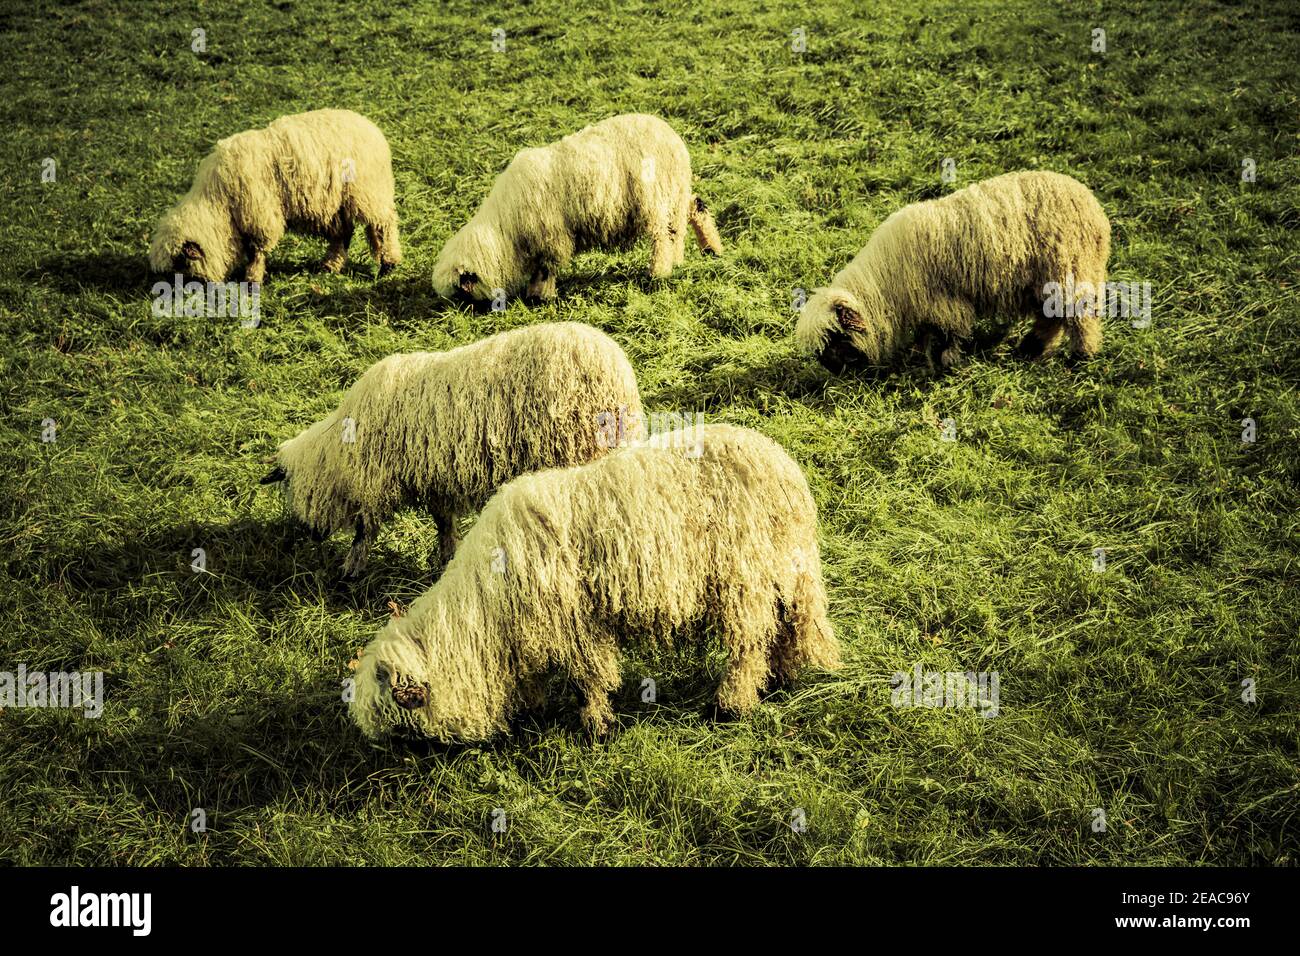 Shaggy long-haired sheep in a meadow Stock Photo